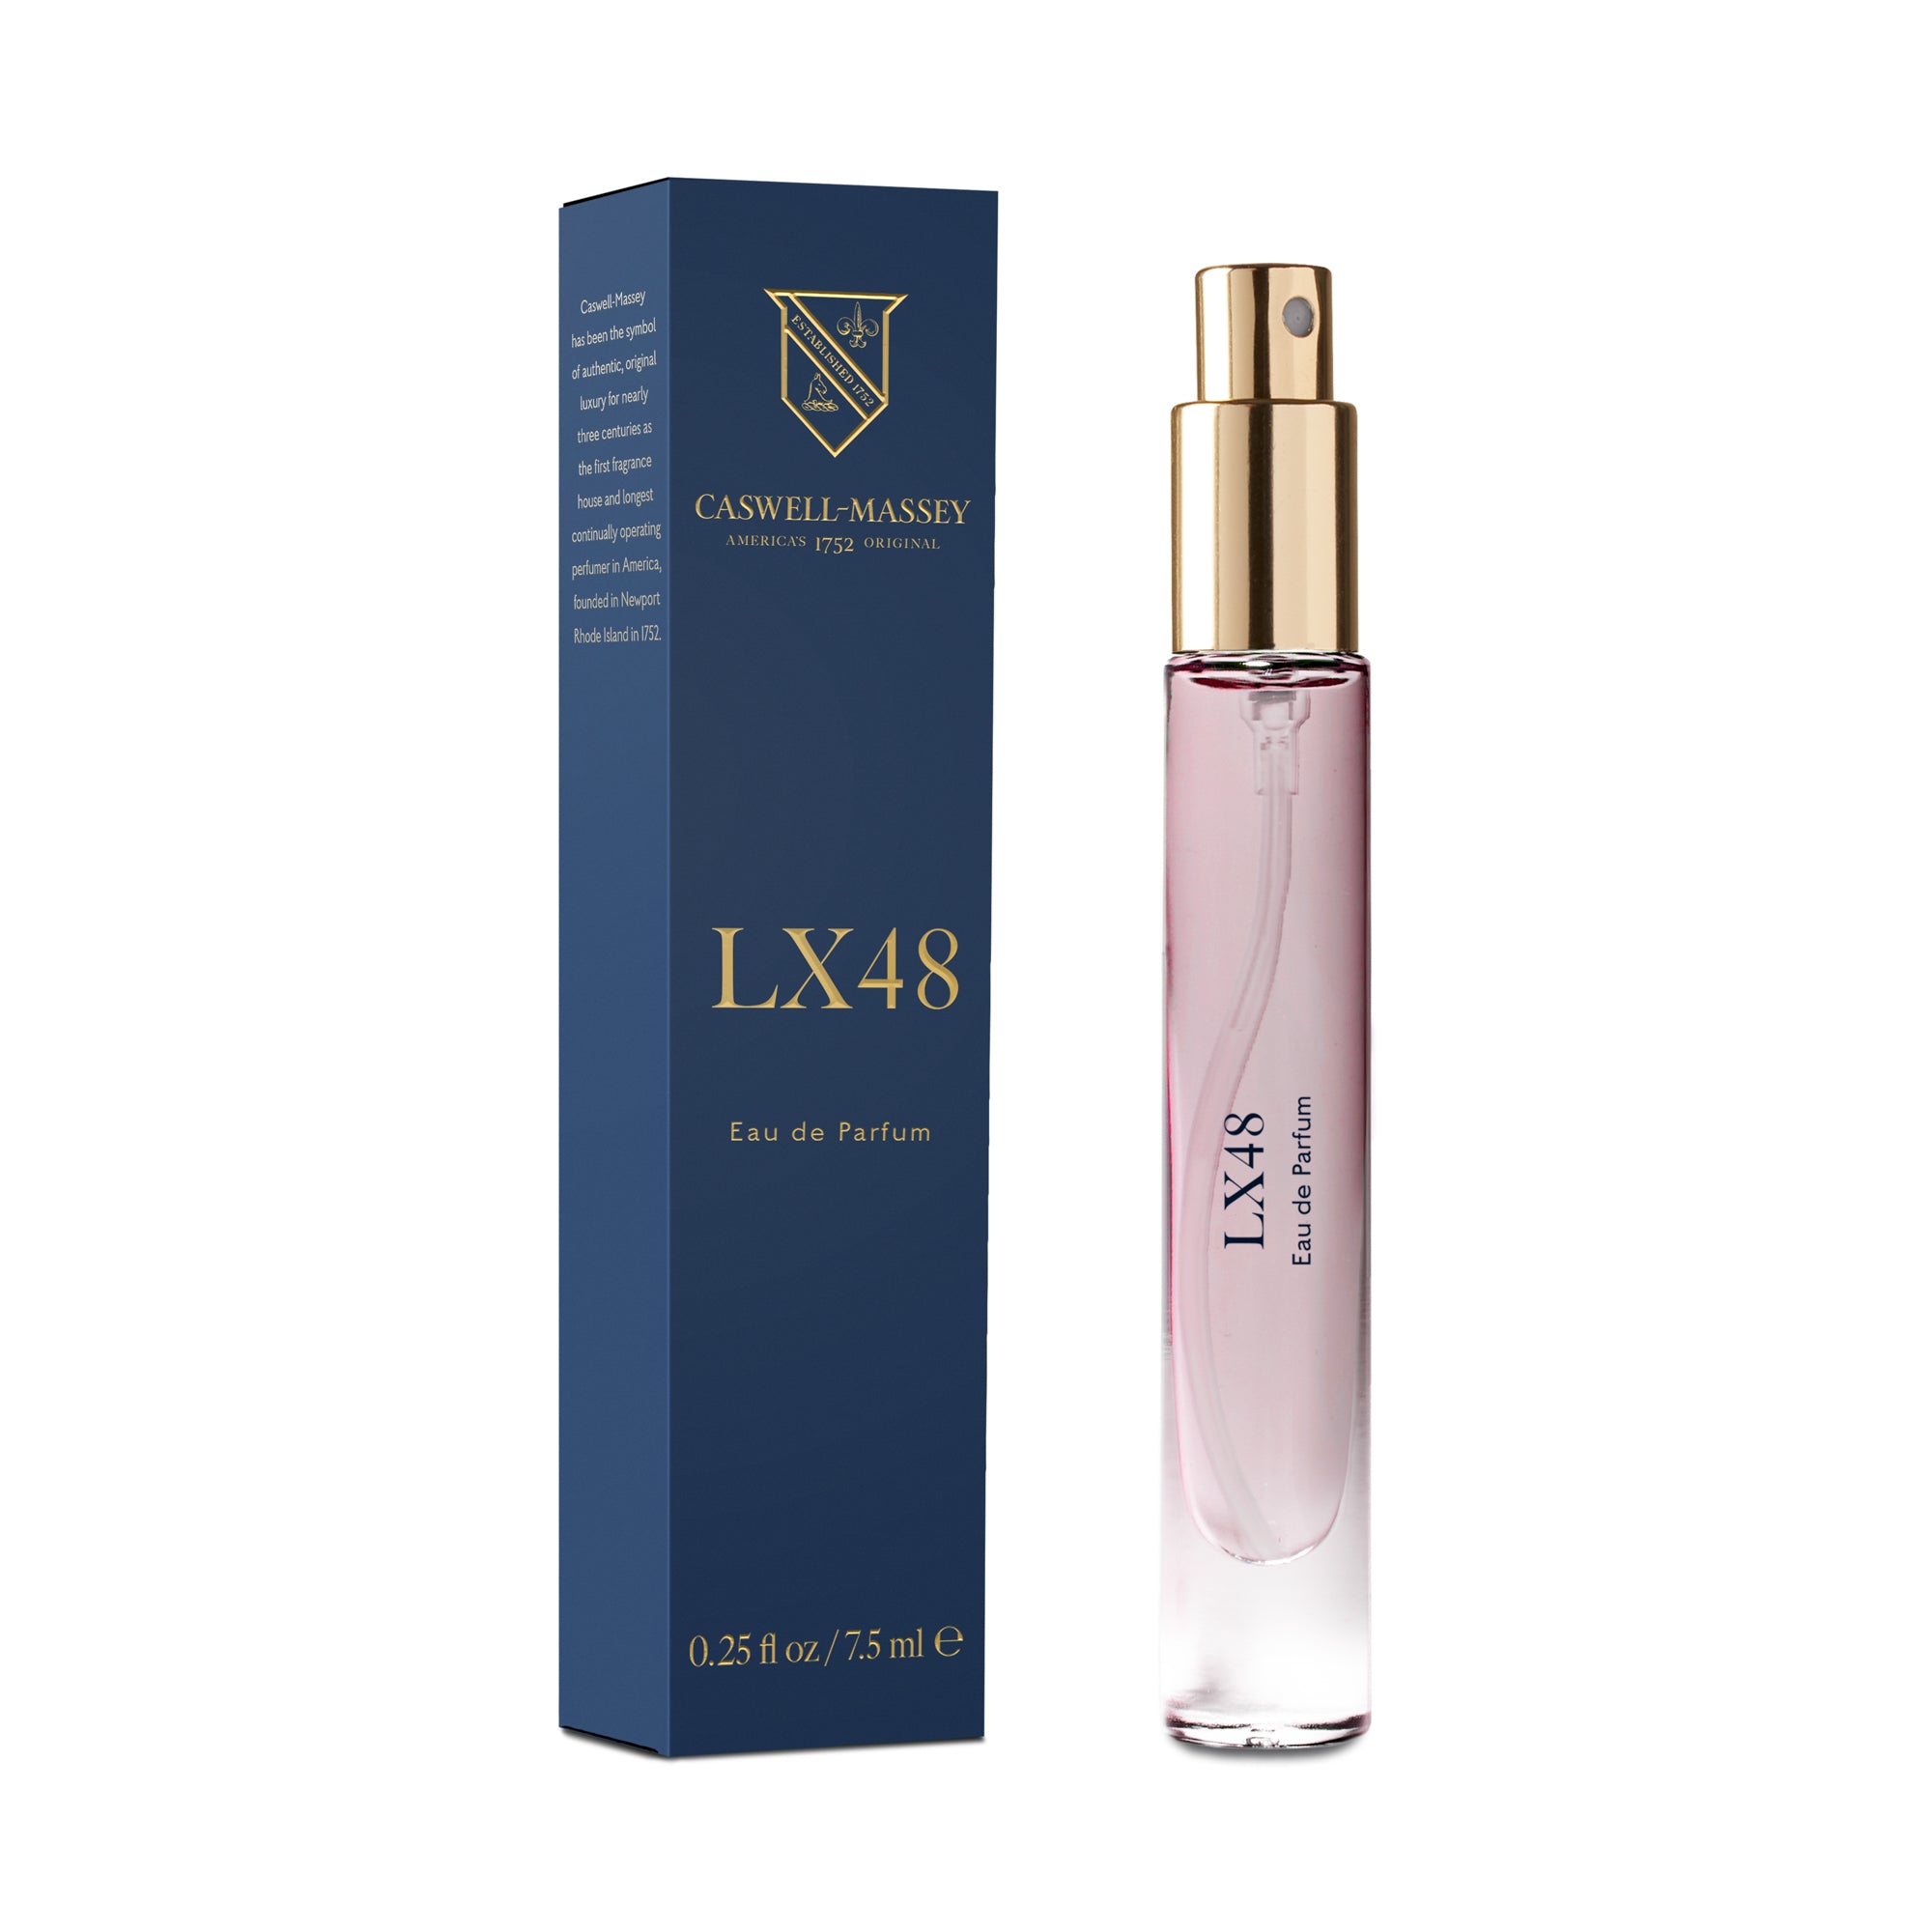 LX48 Eau de Parfum, Fine Fragrance by Caswell-Massey 7.5mL Discovery Size, shown with navy blue box